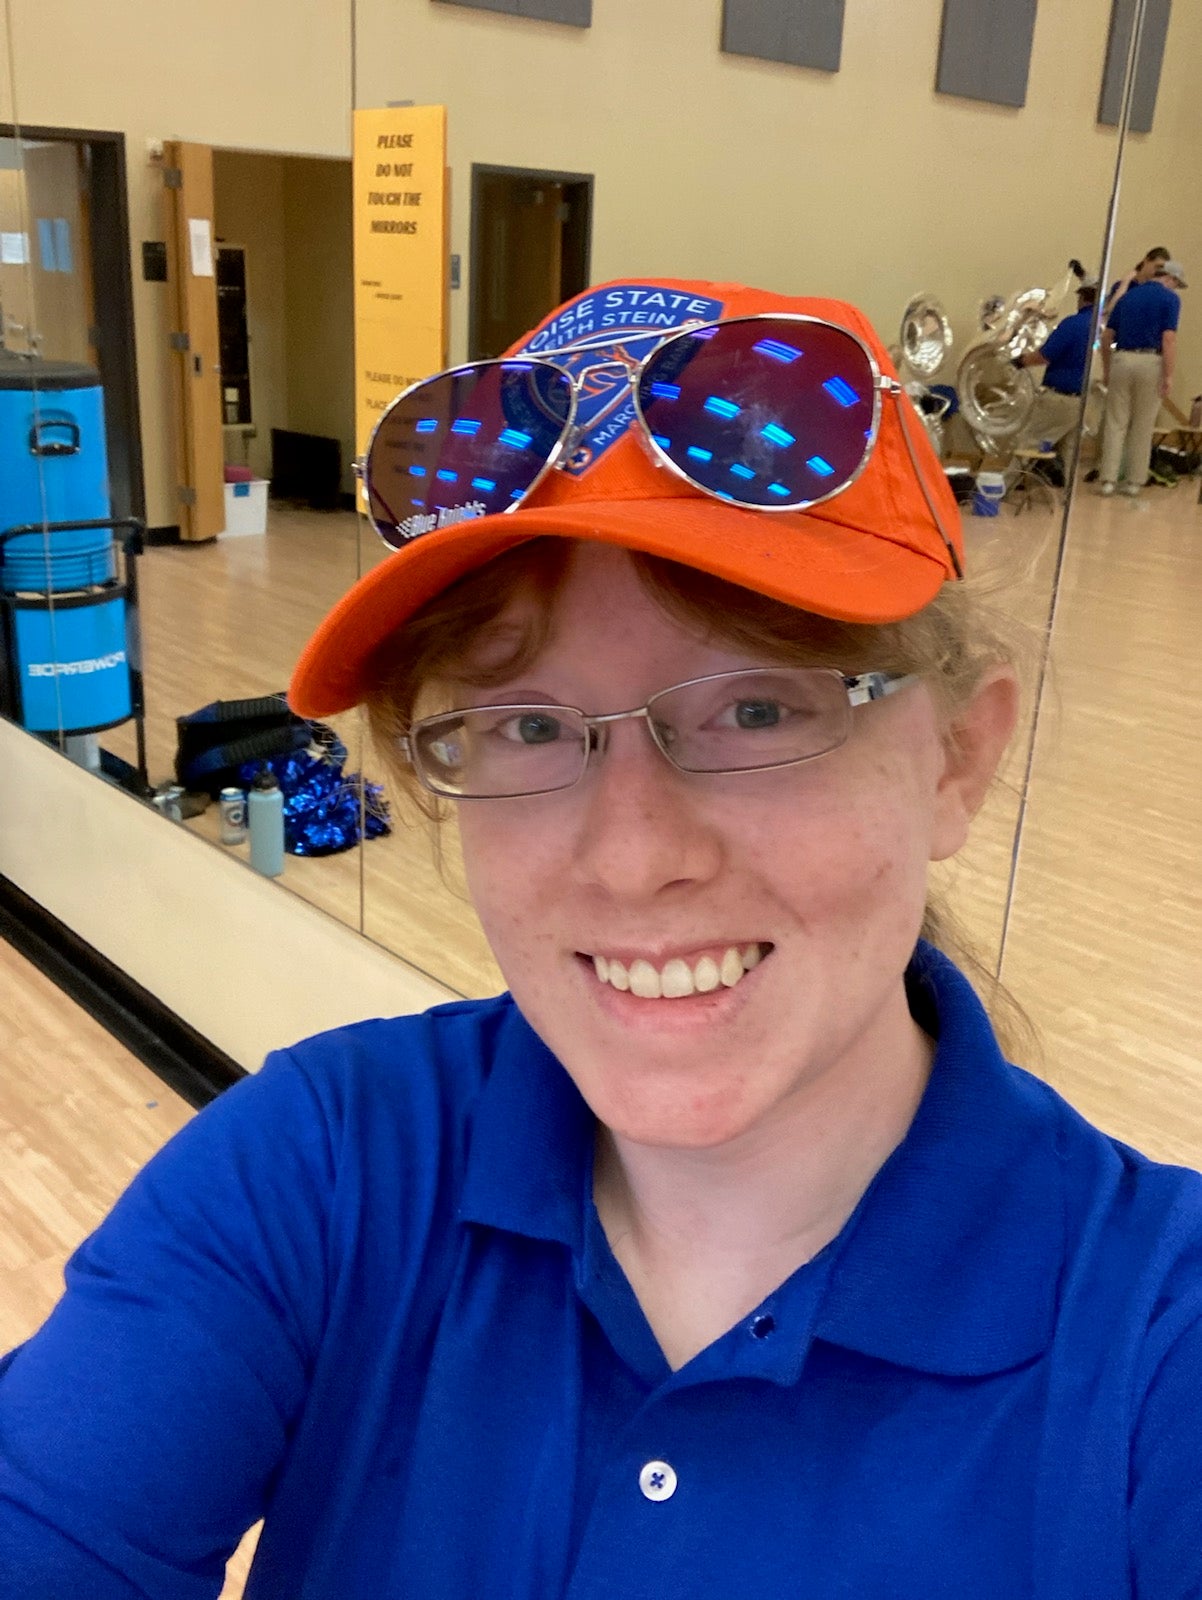 Mackenzie Bennett wearing an orange hat and blue polo shirt standing in front of musical instruments